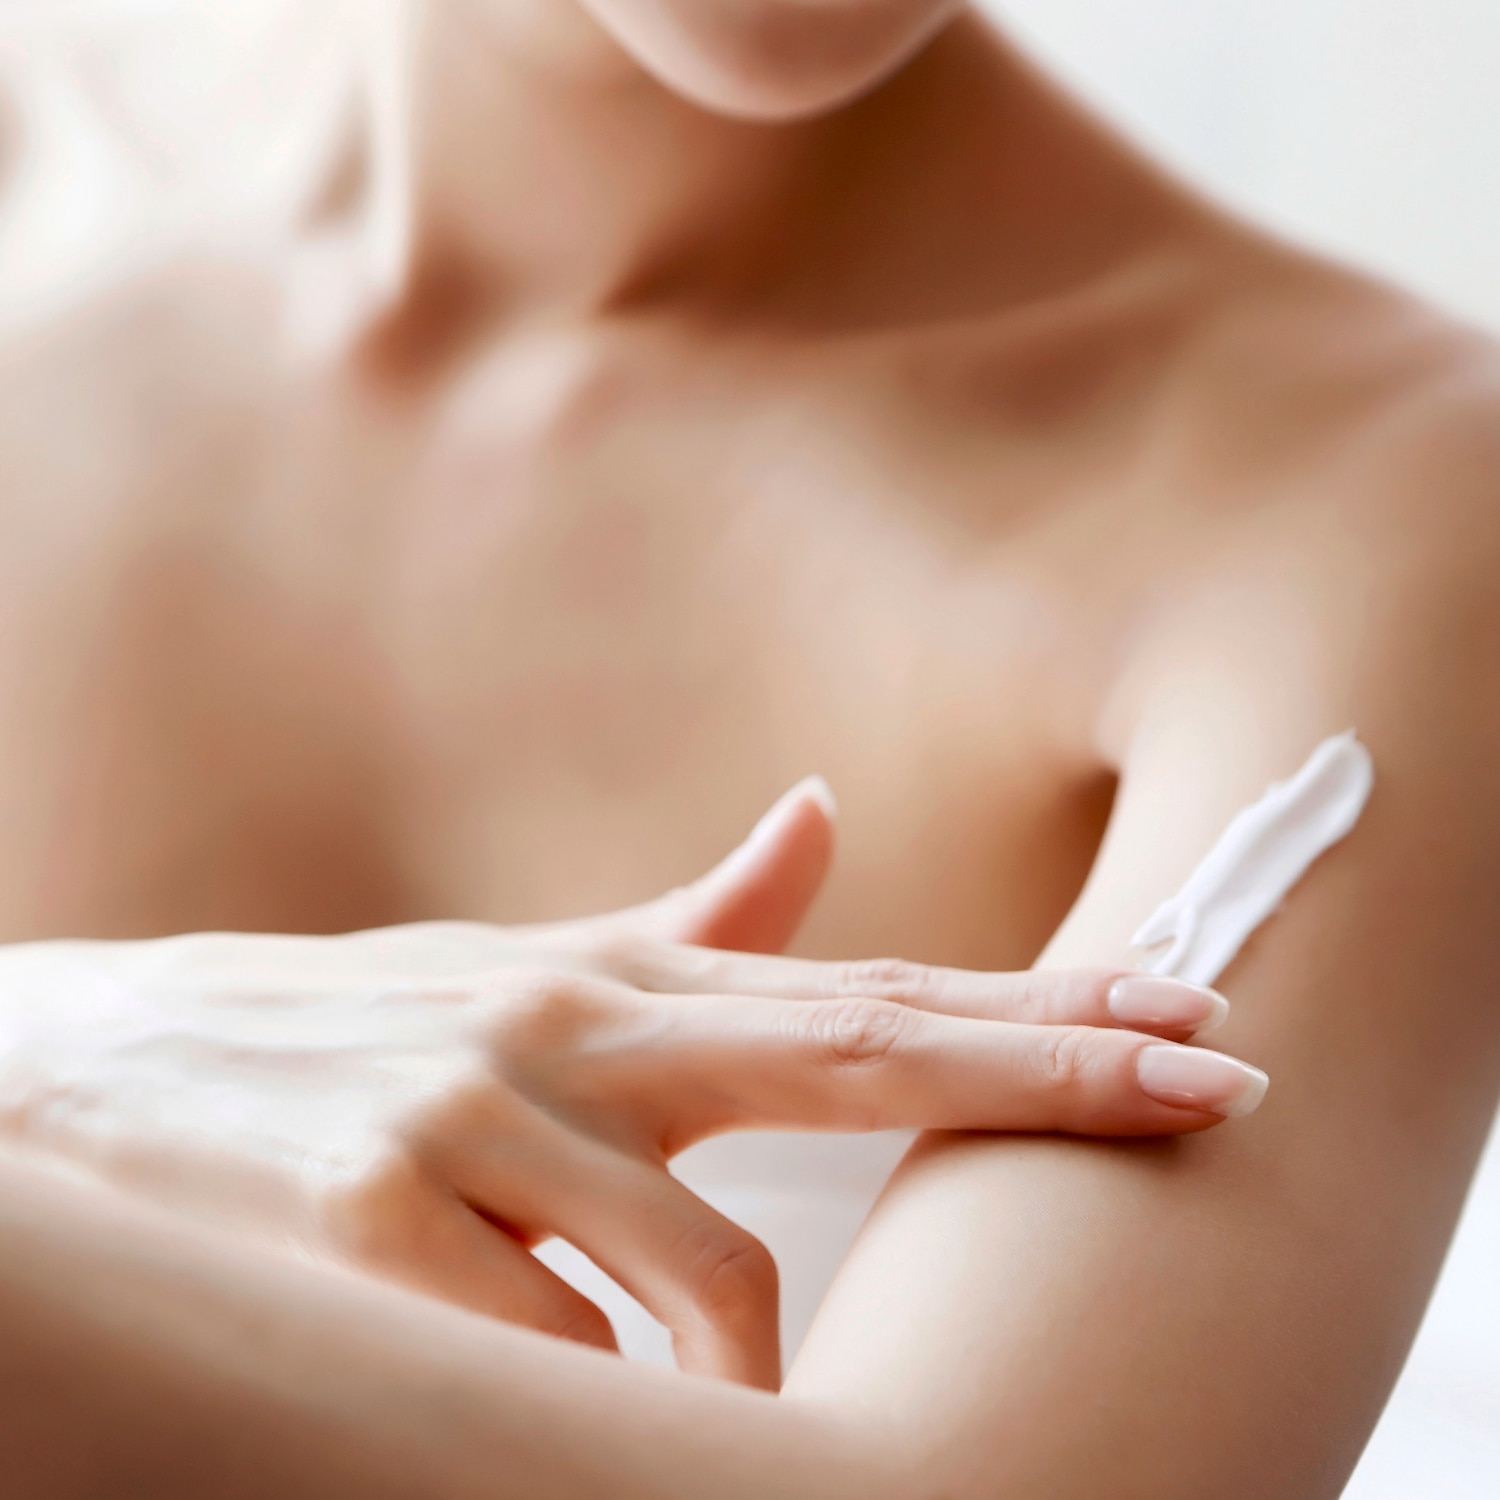 A person applying body lotion on upper arm.